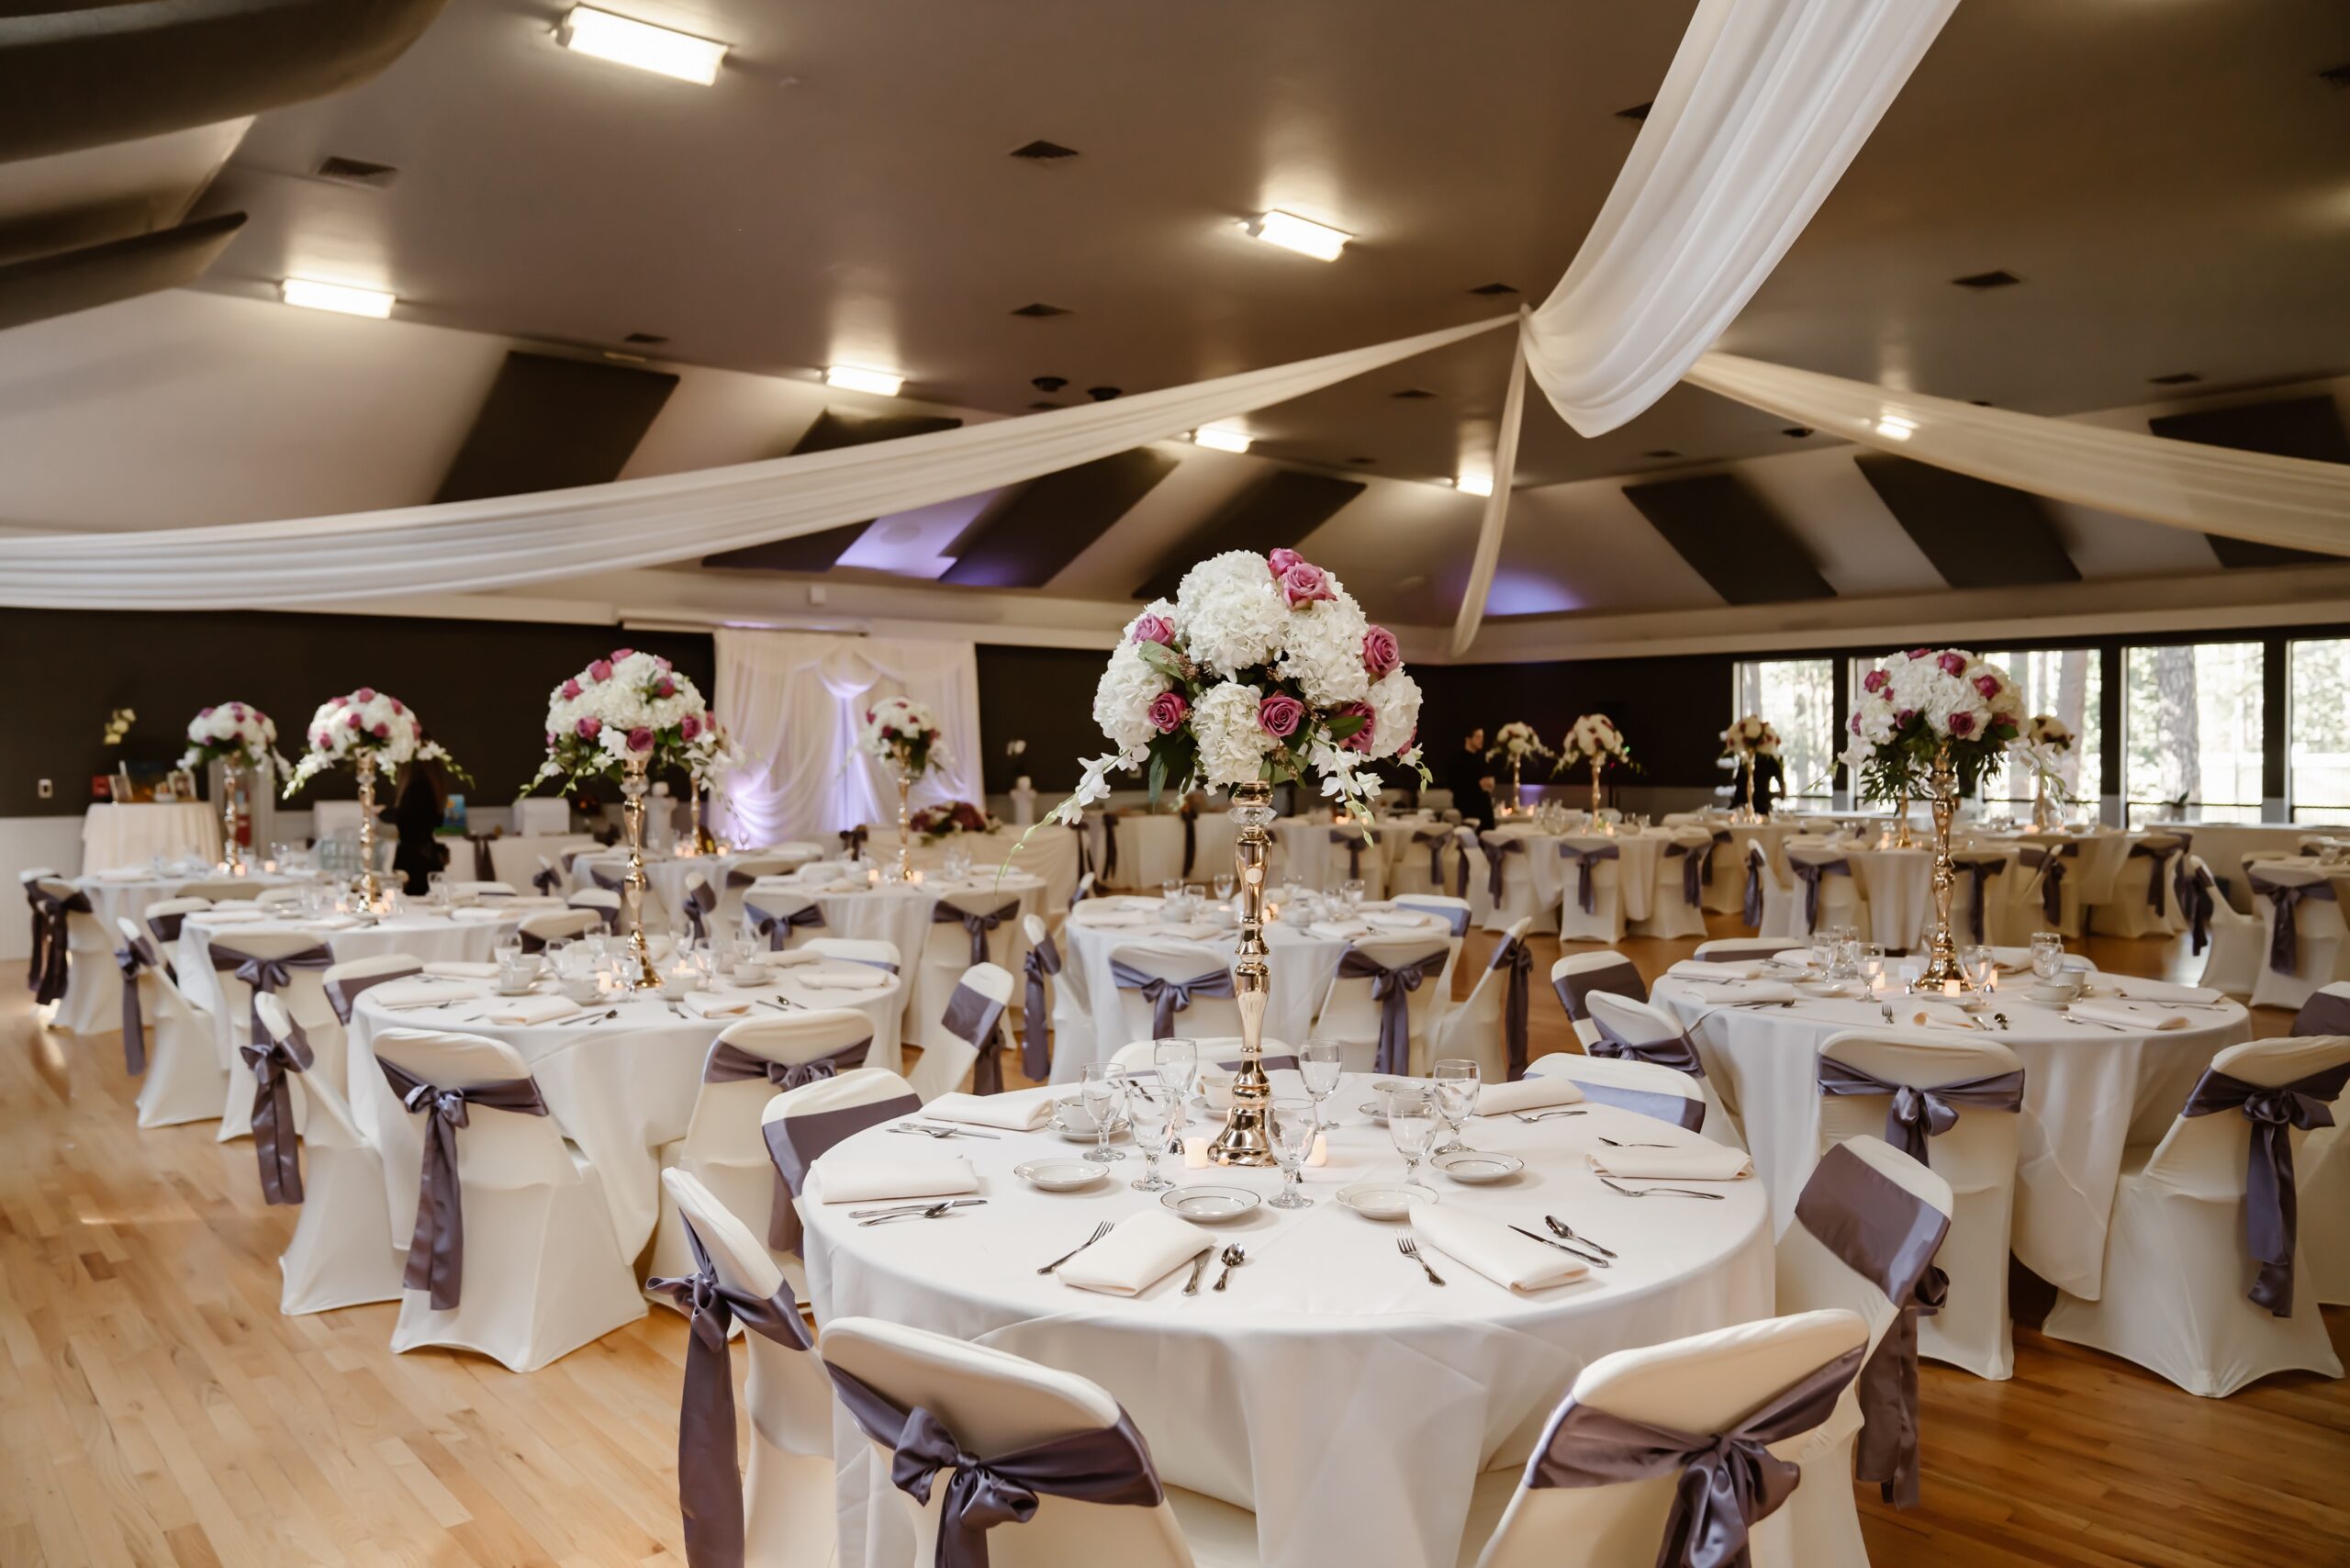 Indoor wedding reception at Ponderosa Hall at the Nevada Country Fairgrounds